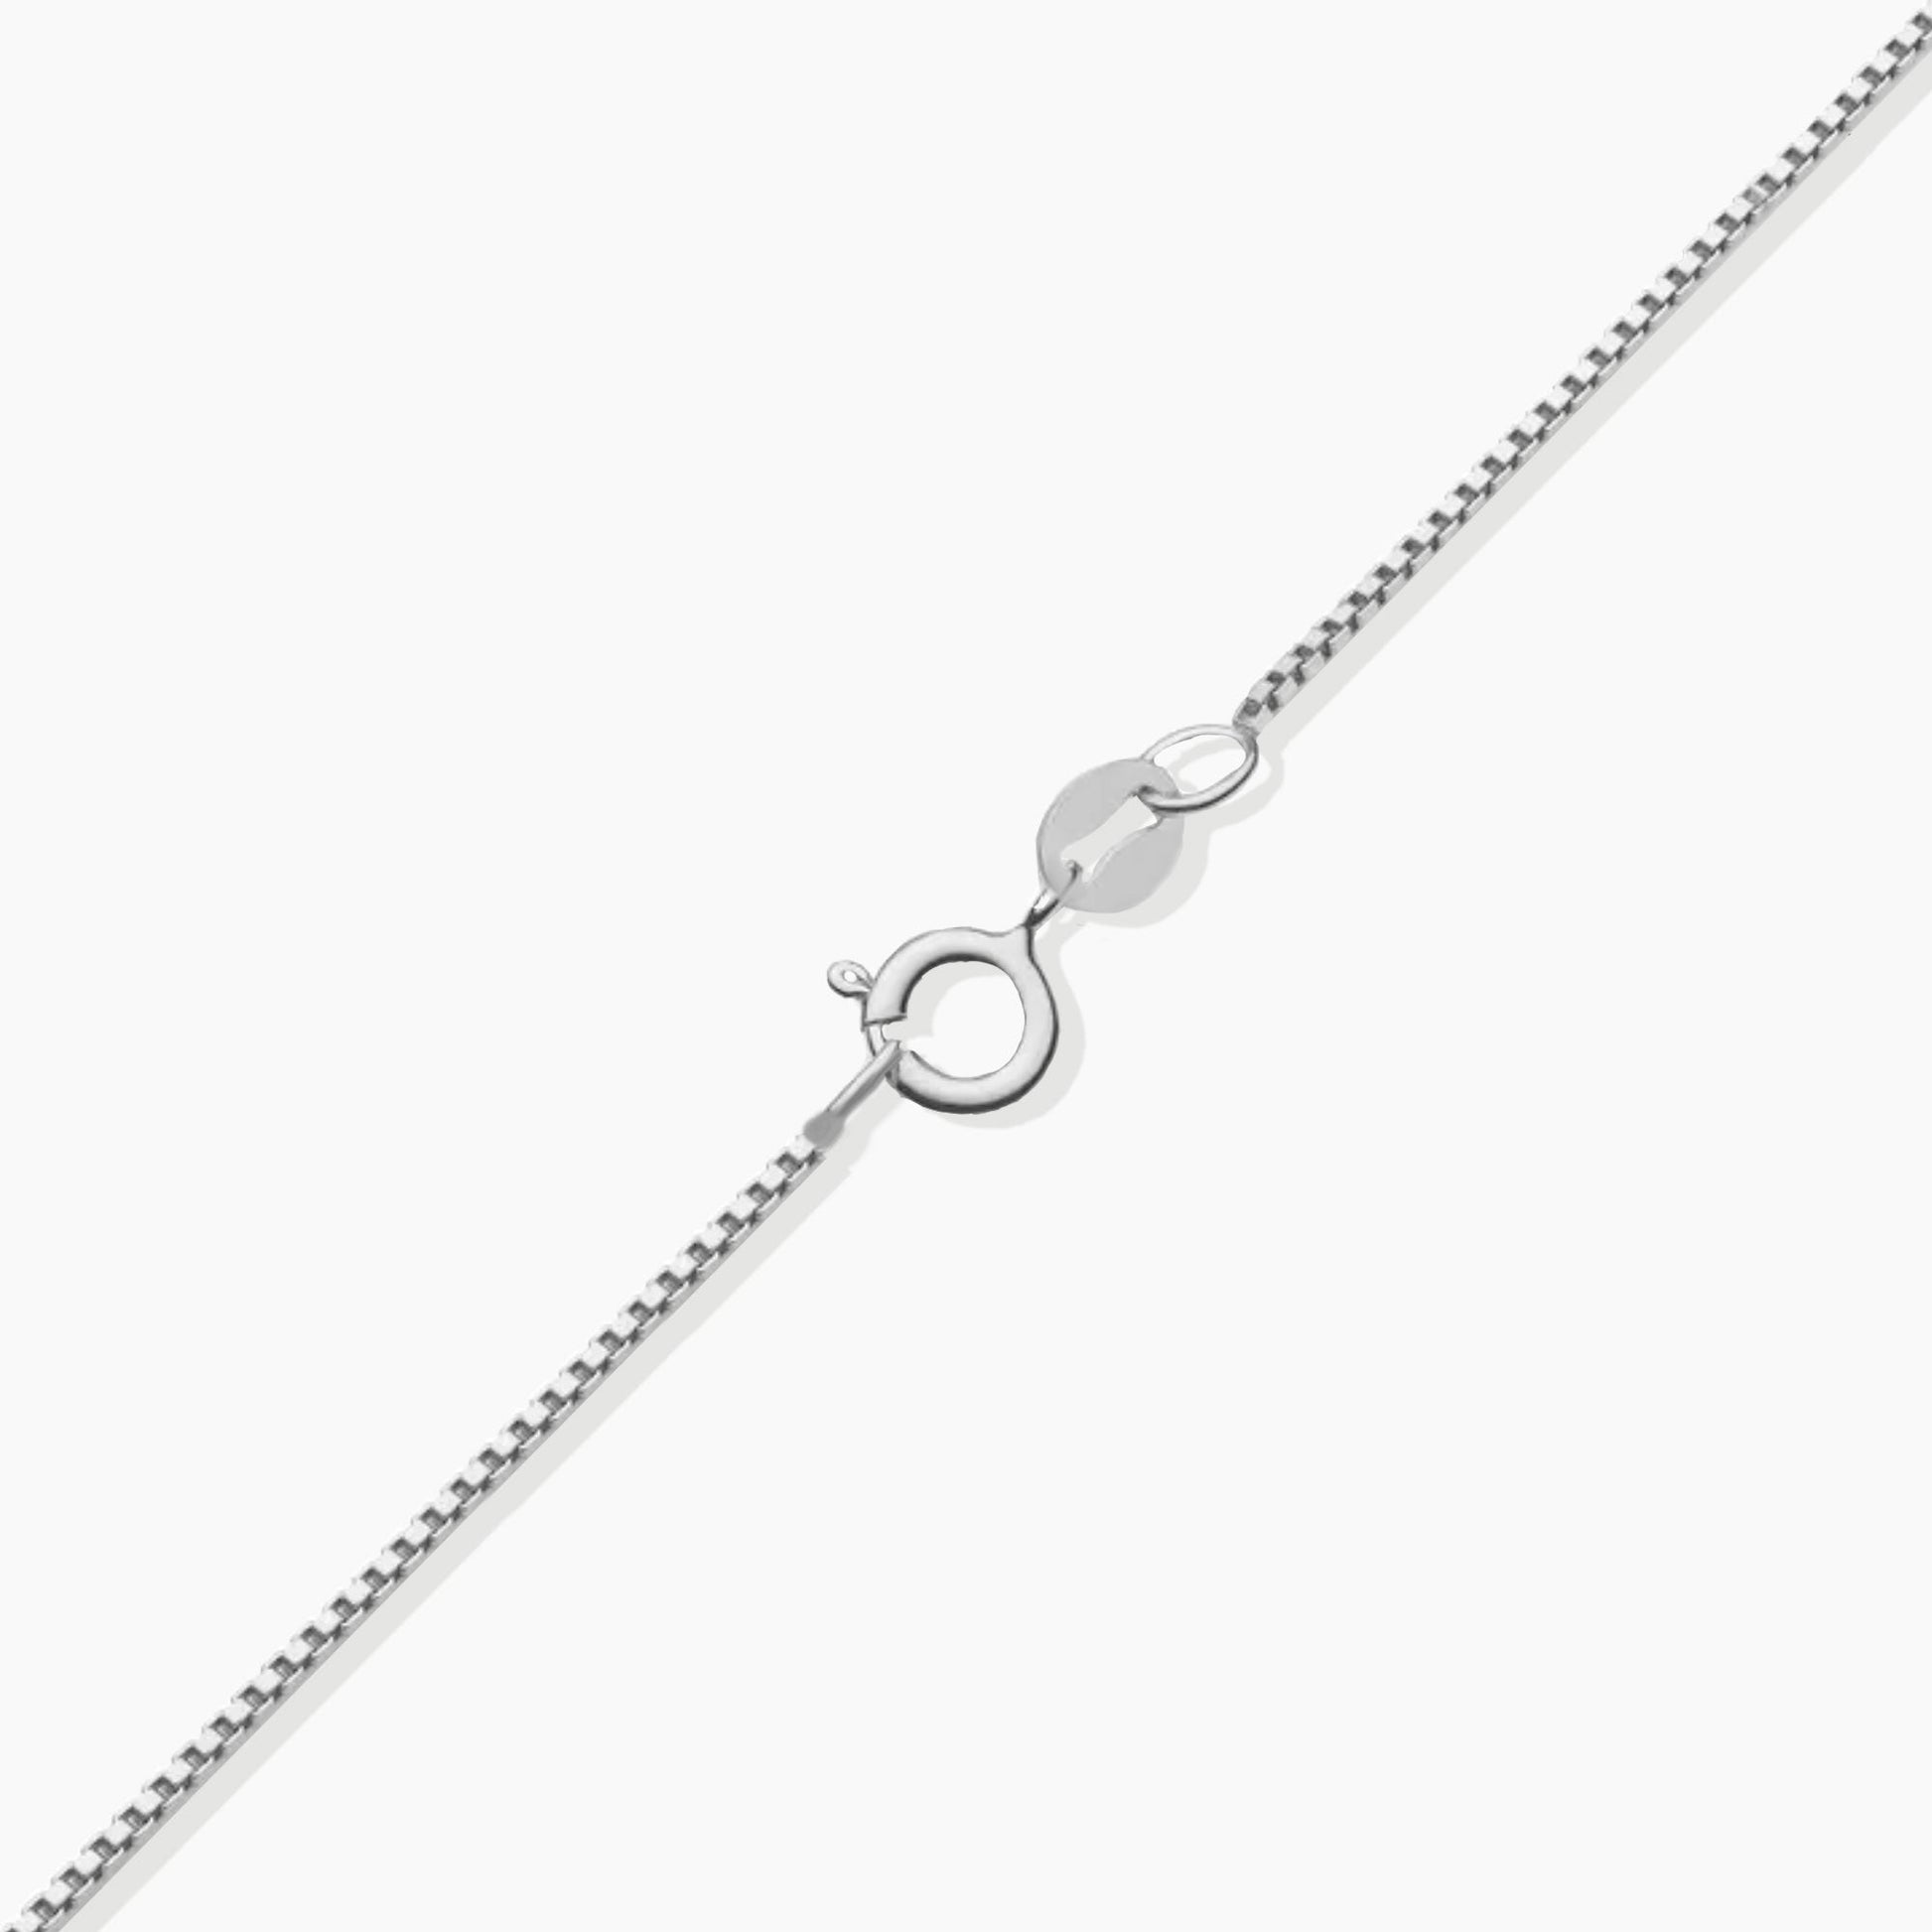 silver box chain with spring clasp